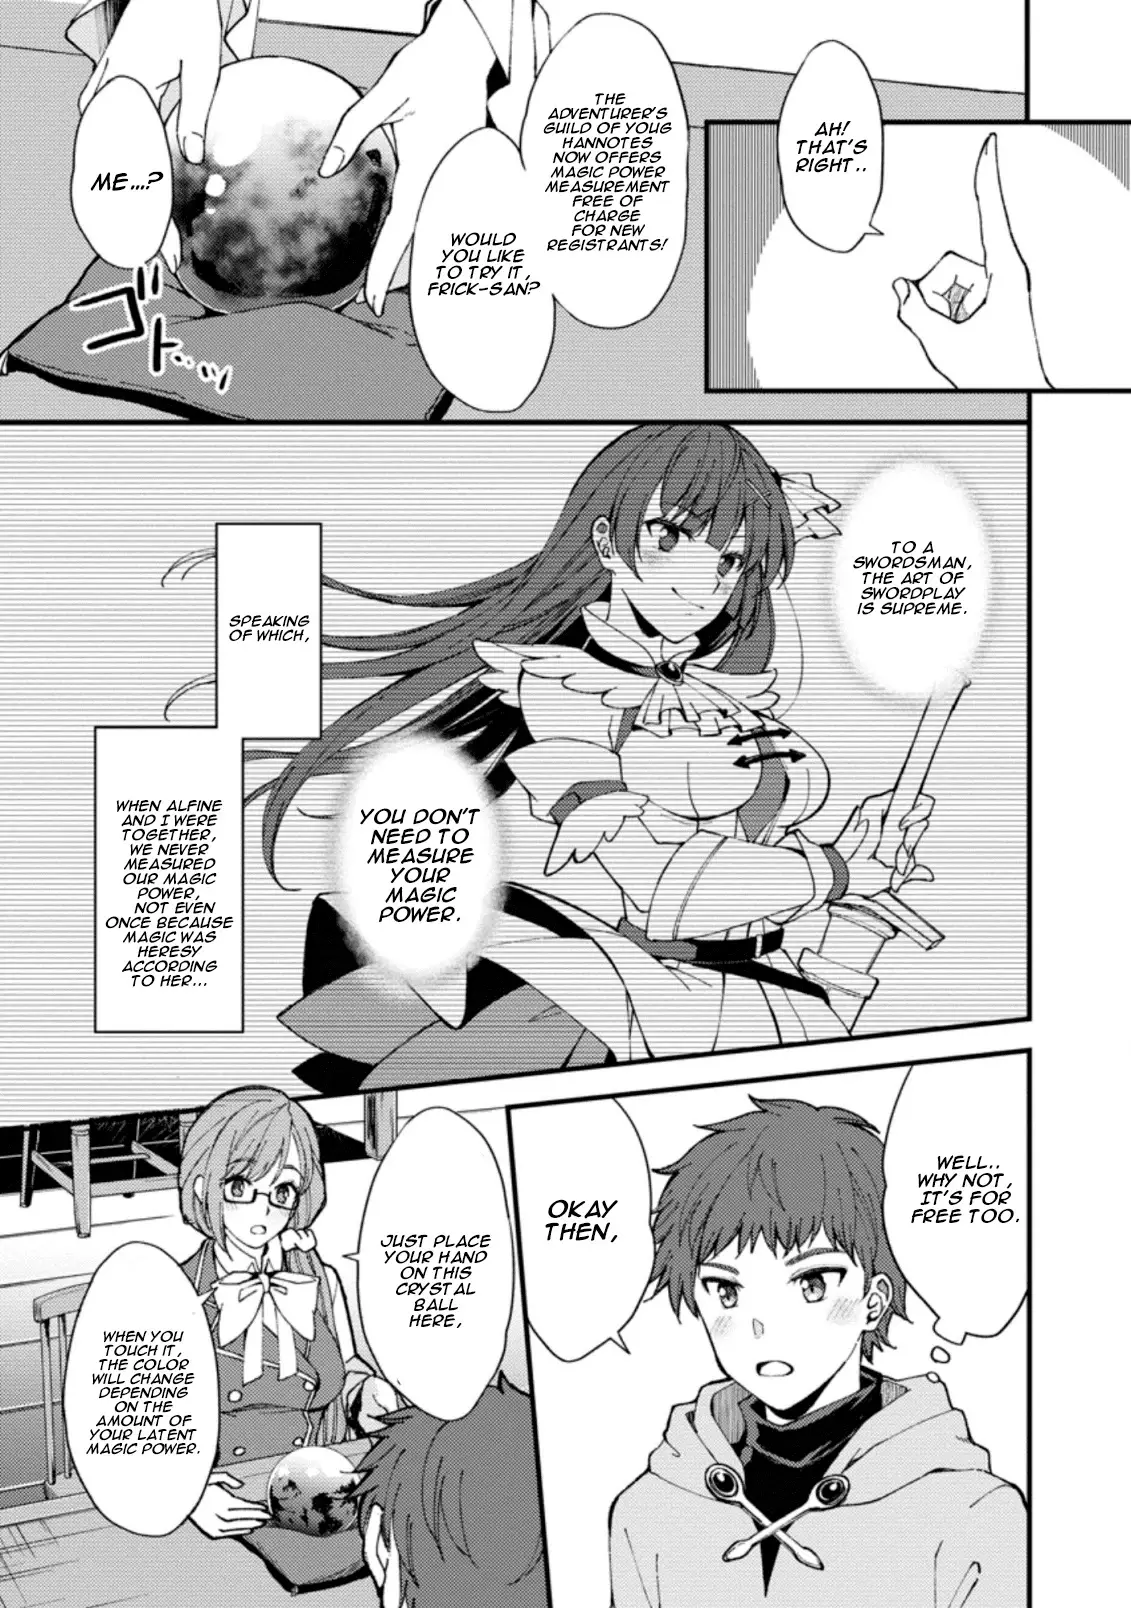 A Sword Master Childhood Friend Power Harassed Me Harshly, So I Broke Off Our Relationship And Make A Fresh Start At The Frontier As A Magic Swordsman. - 1 page 20